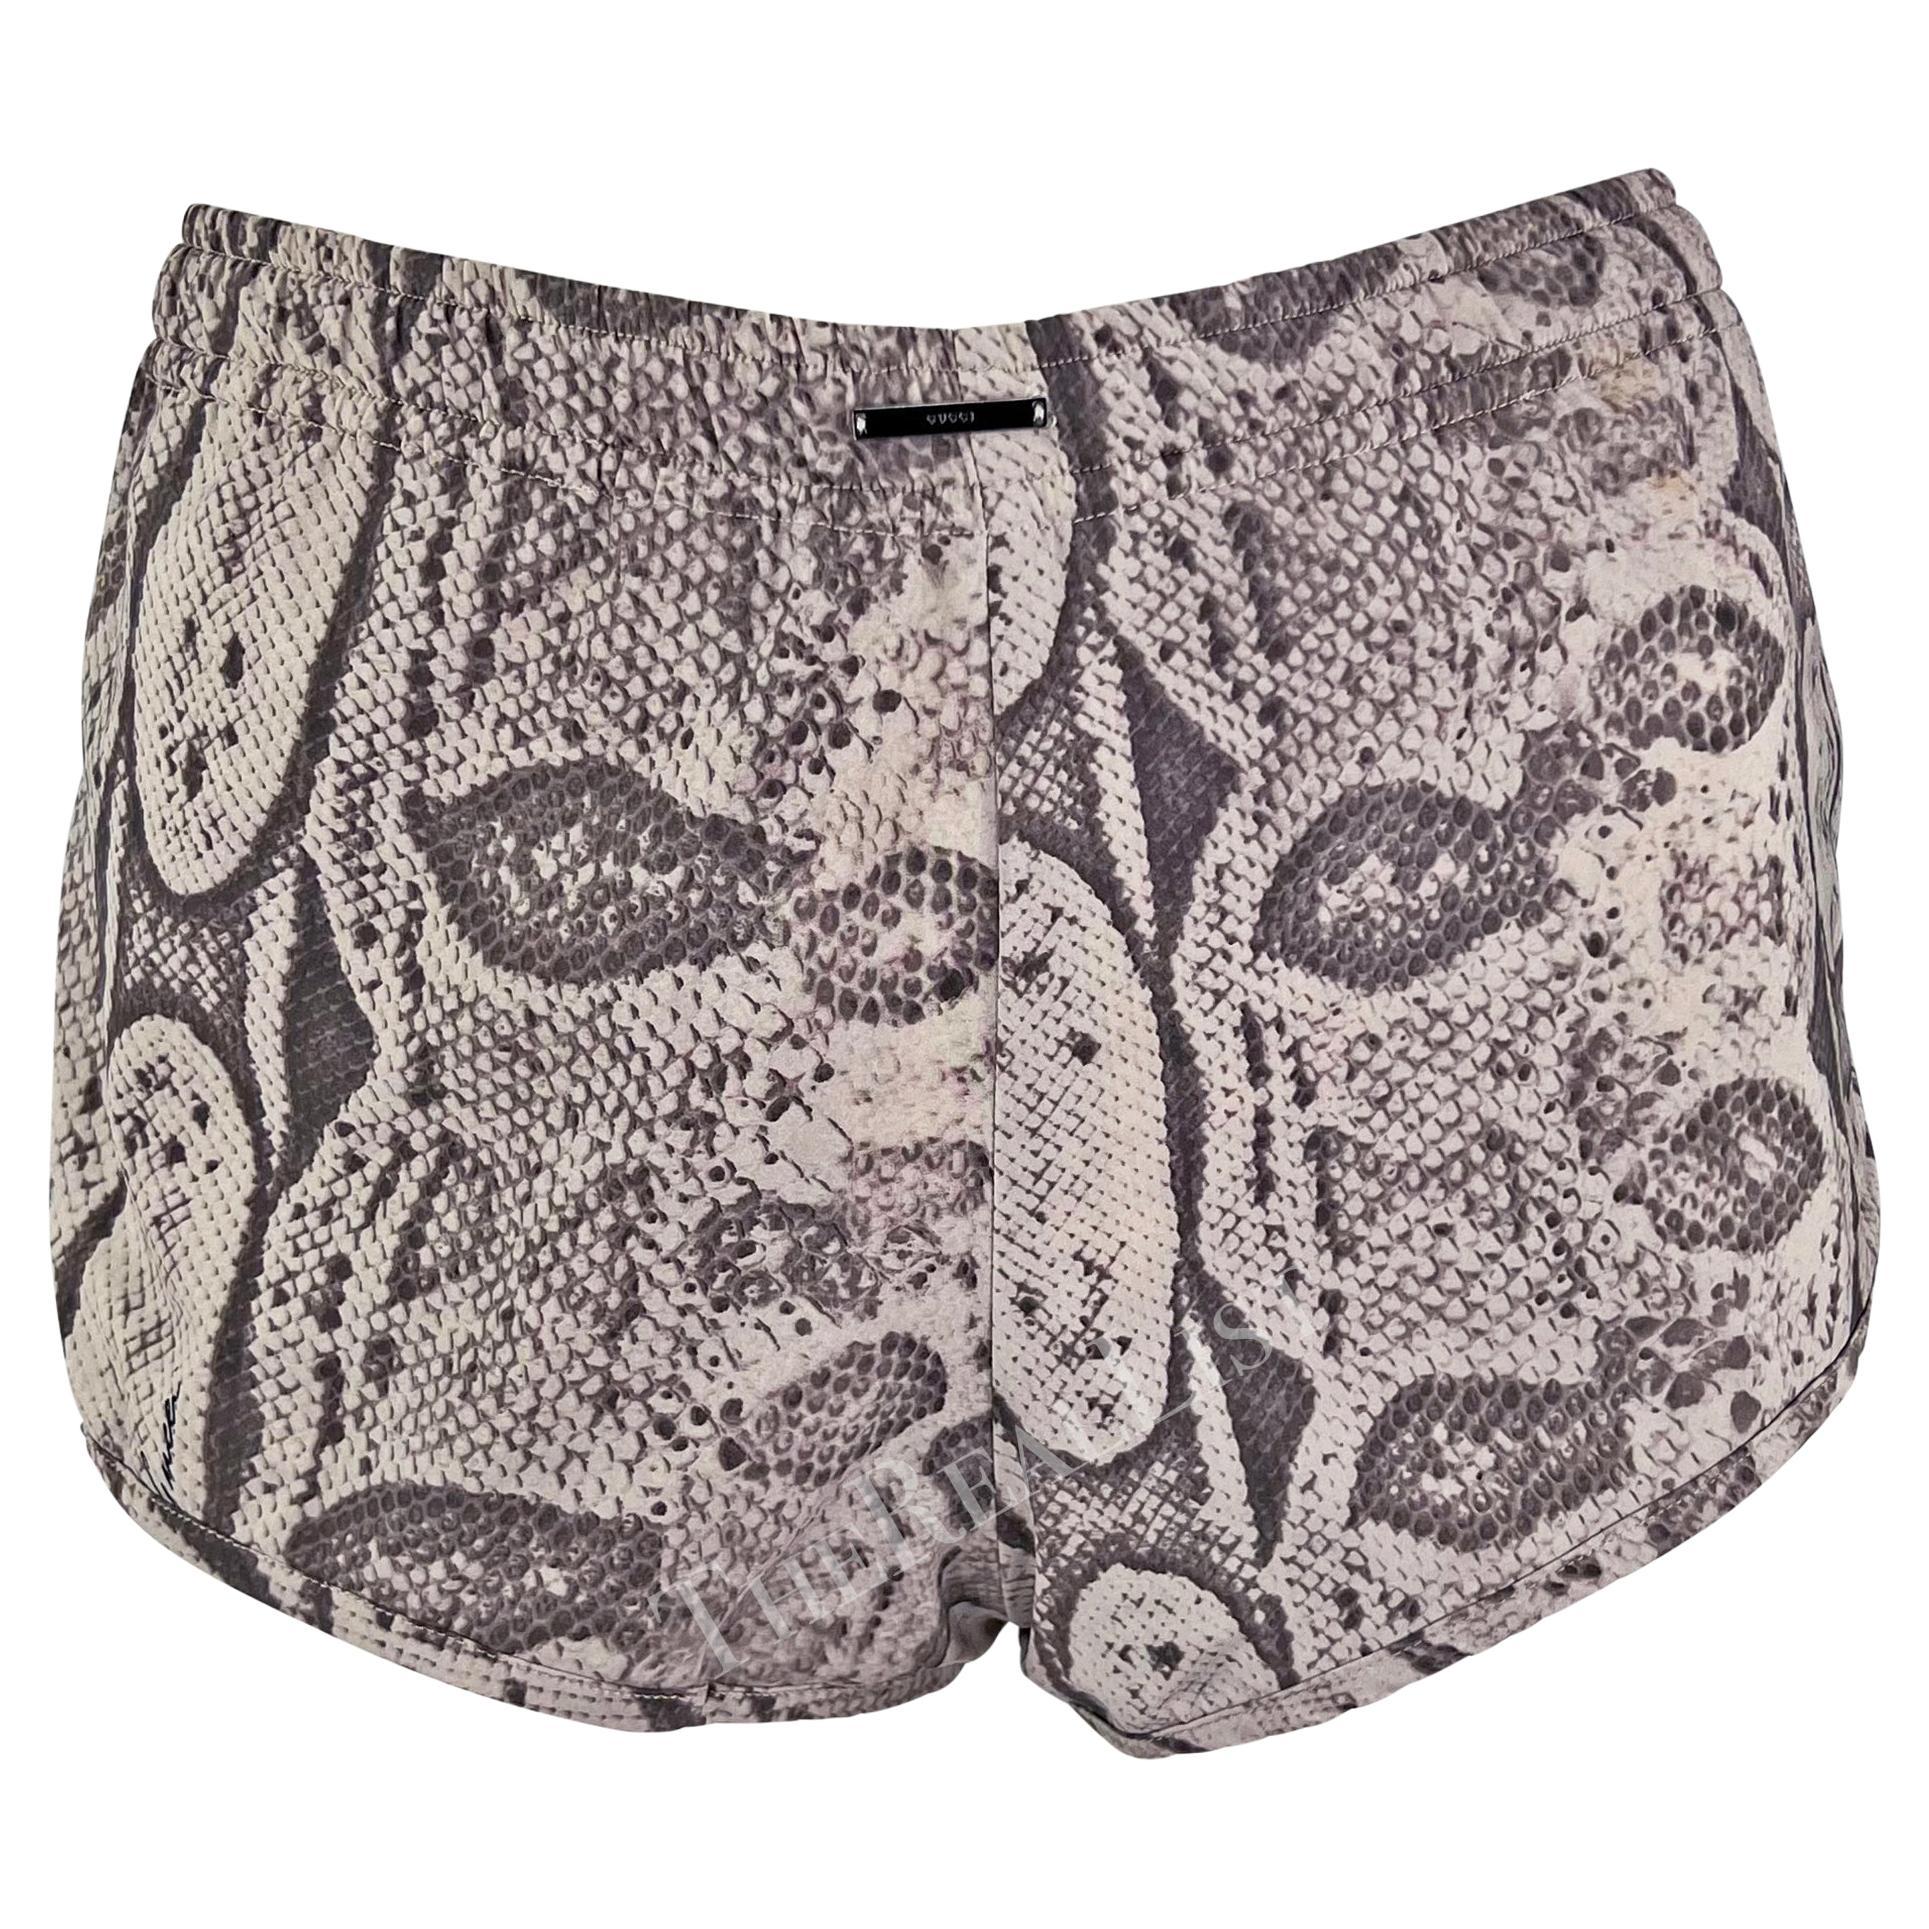 S/S 2000 Gucci by Tom Ford Runway Snake Skin Print Mini Shorts For Sale